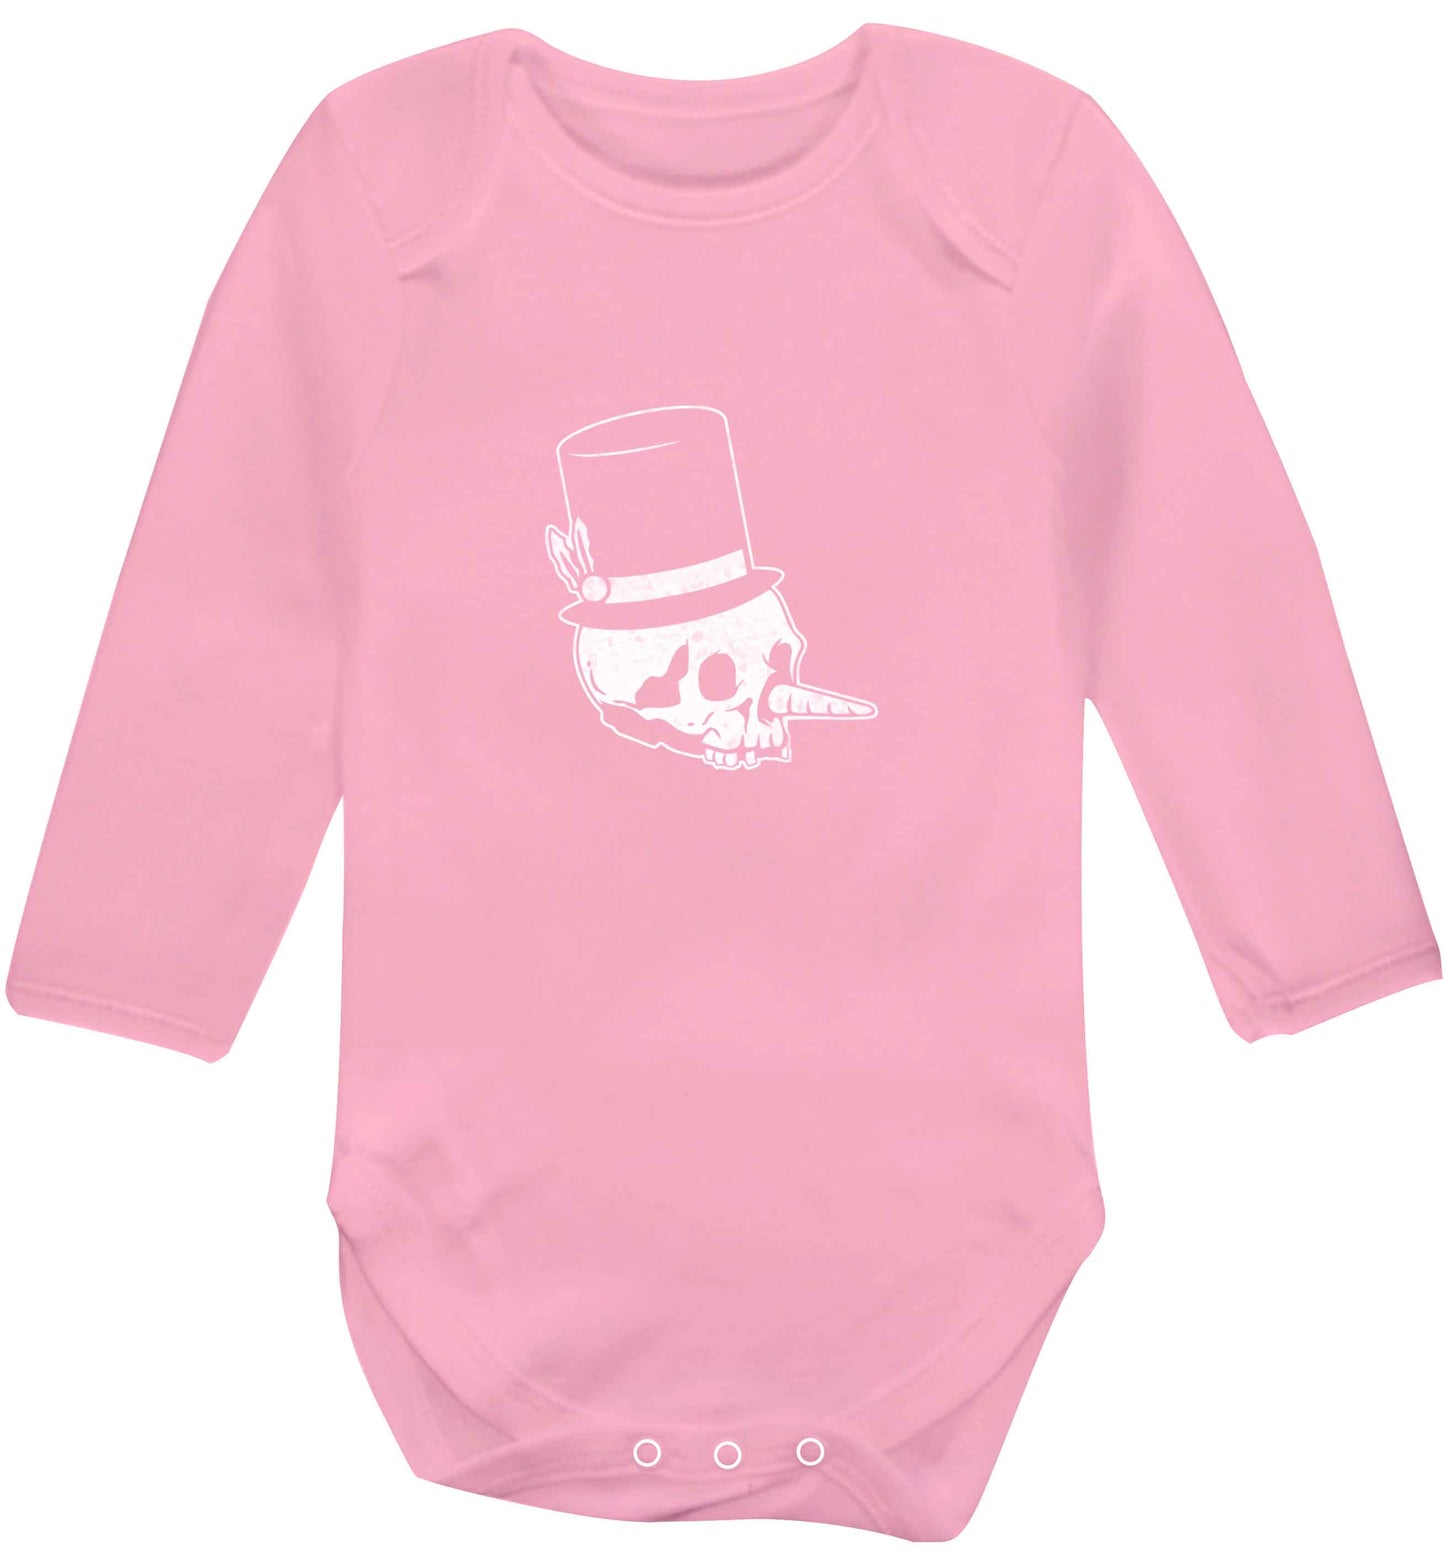 Snowman punk baby vest long sleeved pale pink 6-12 months